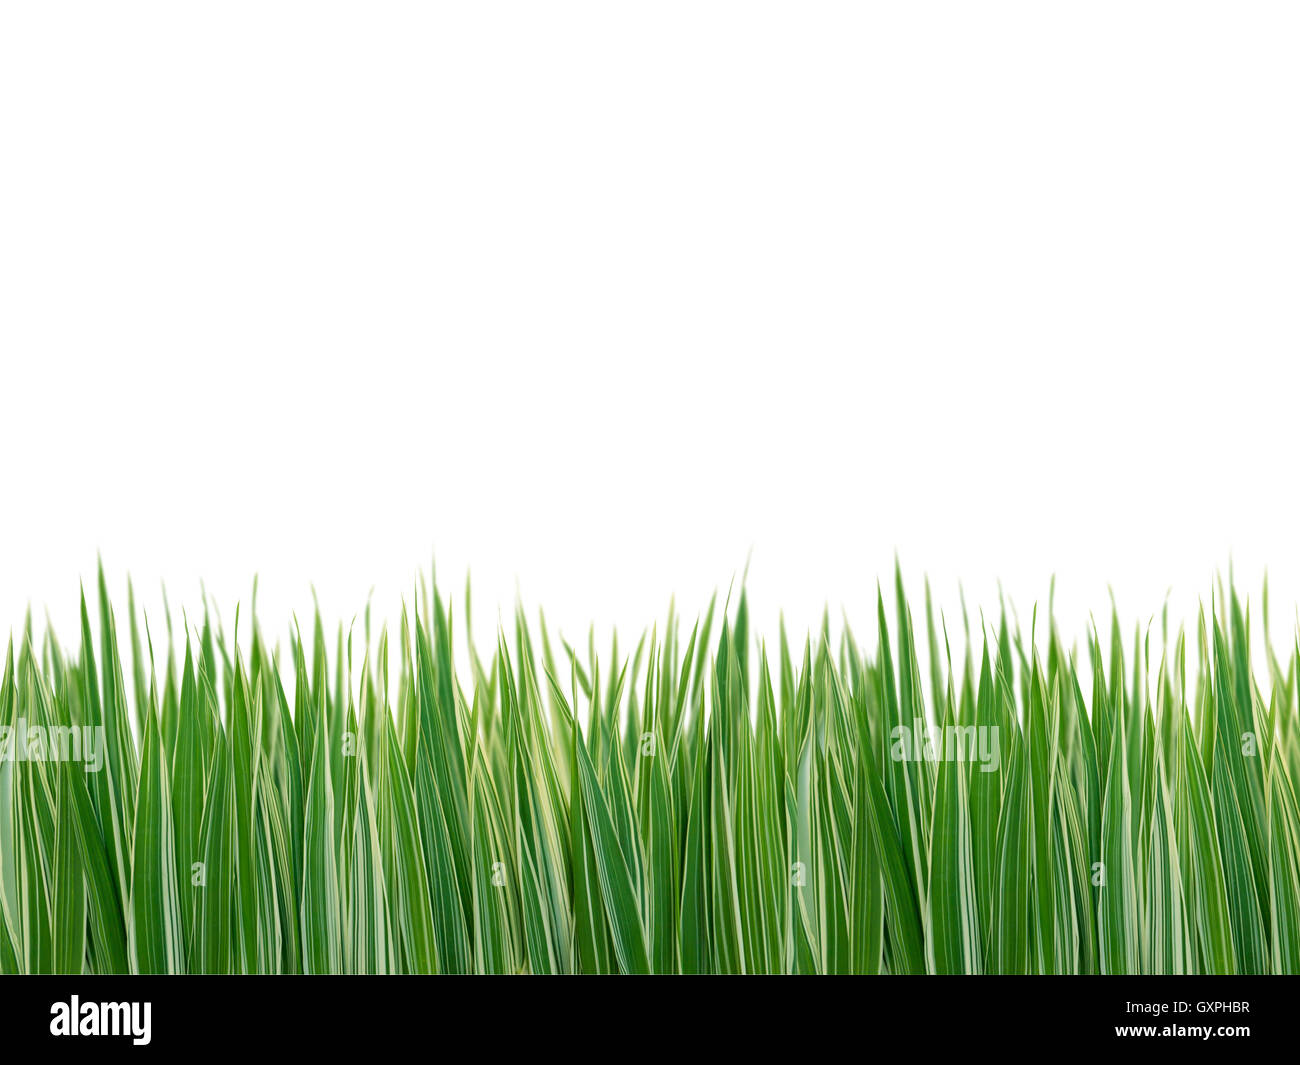 Striped green and white grass isolated on white Stock Photo